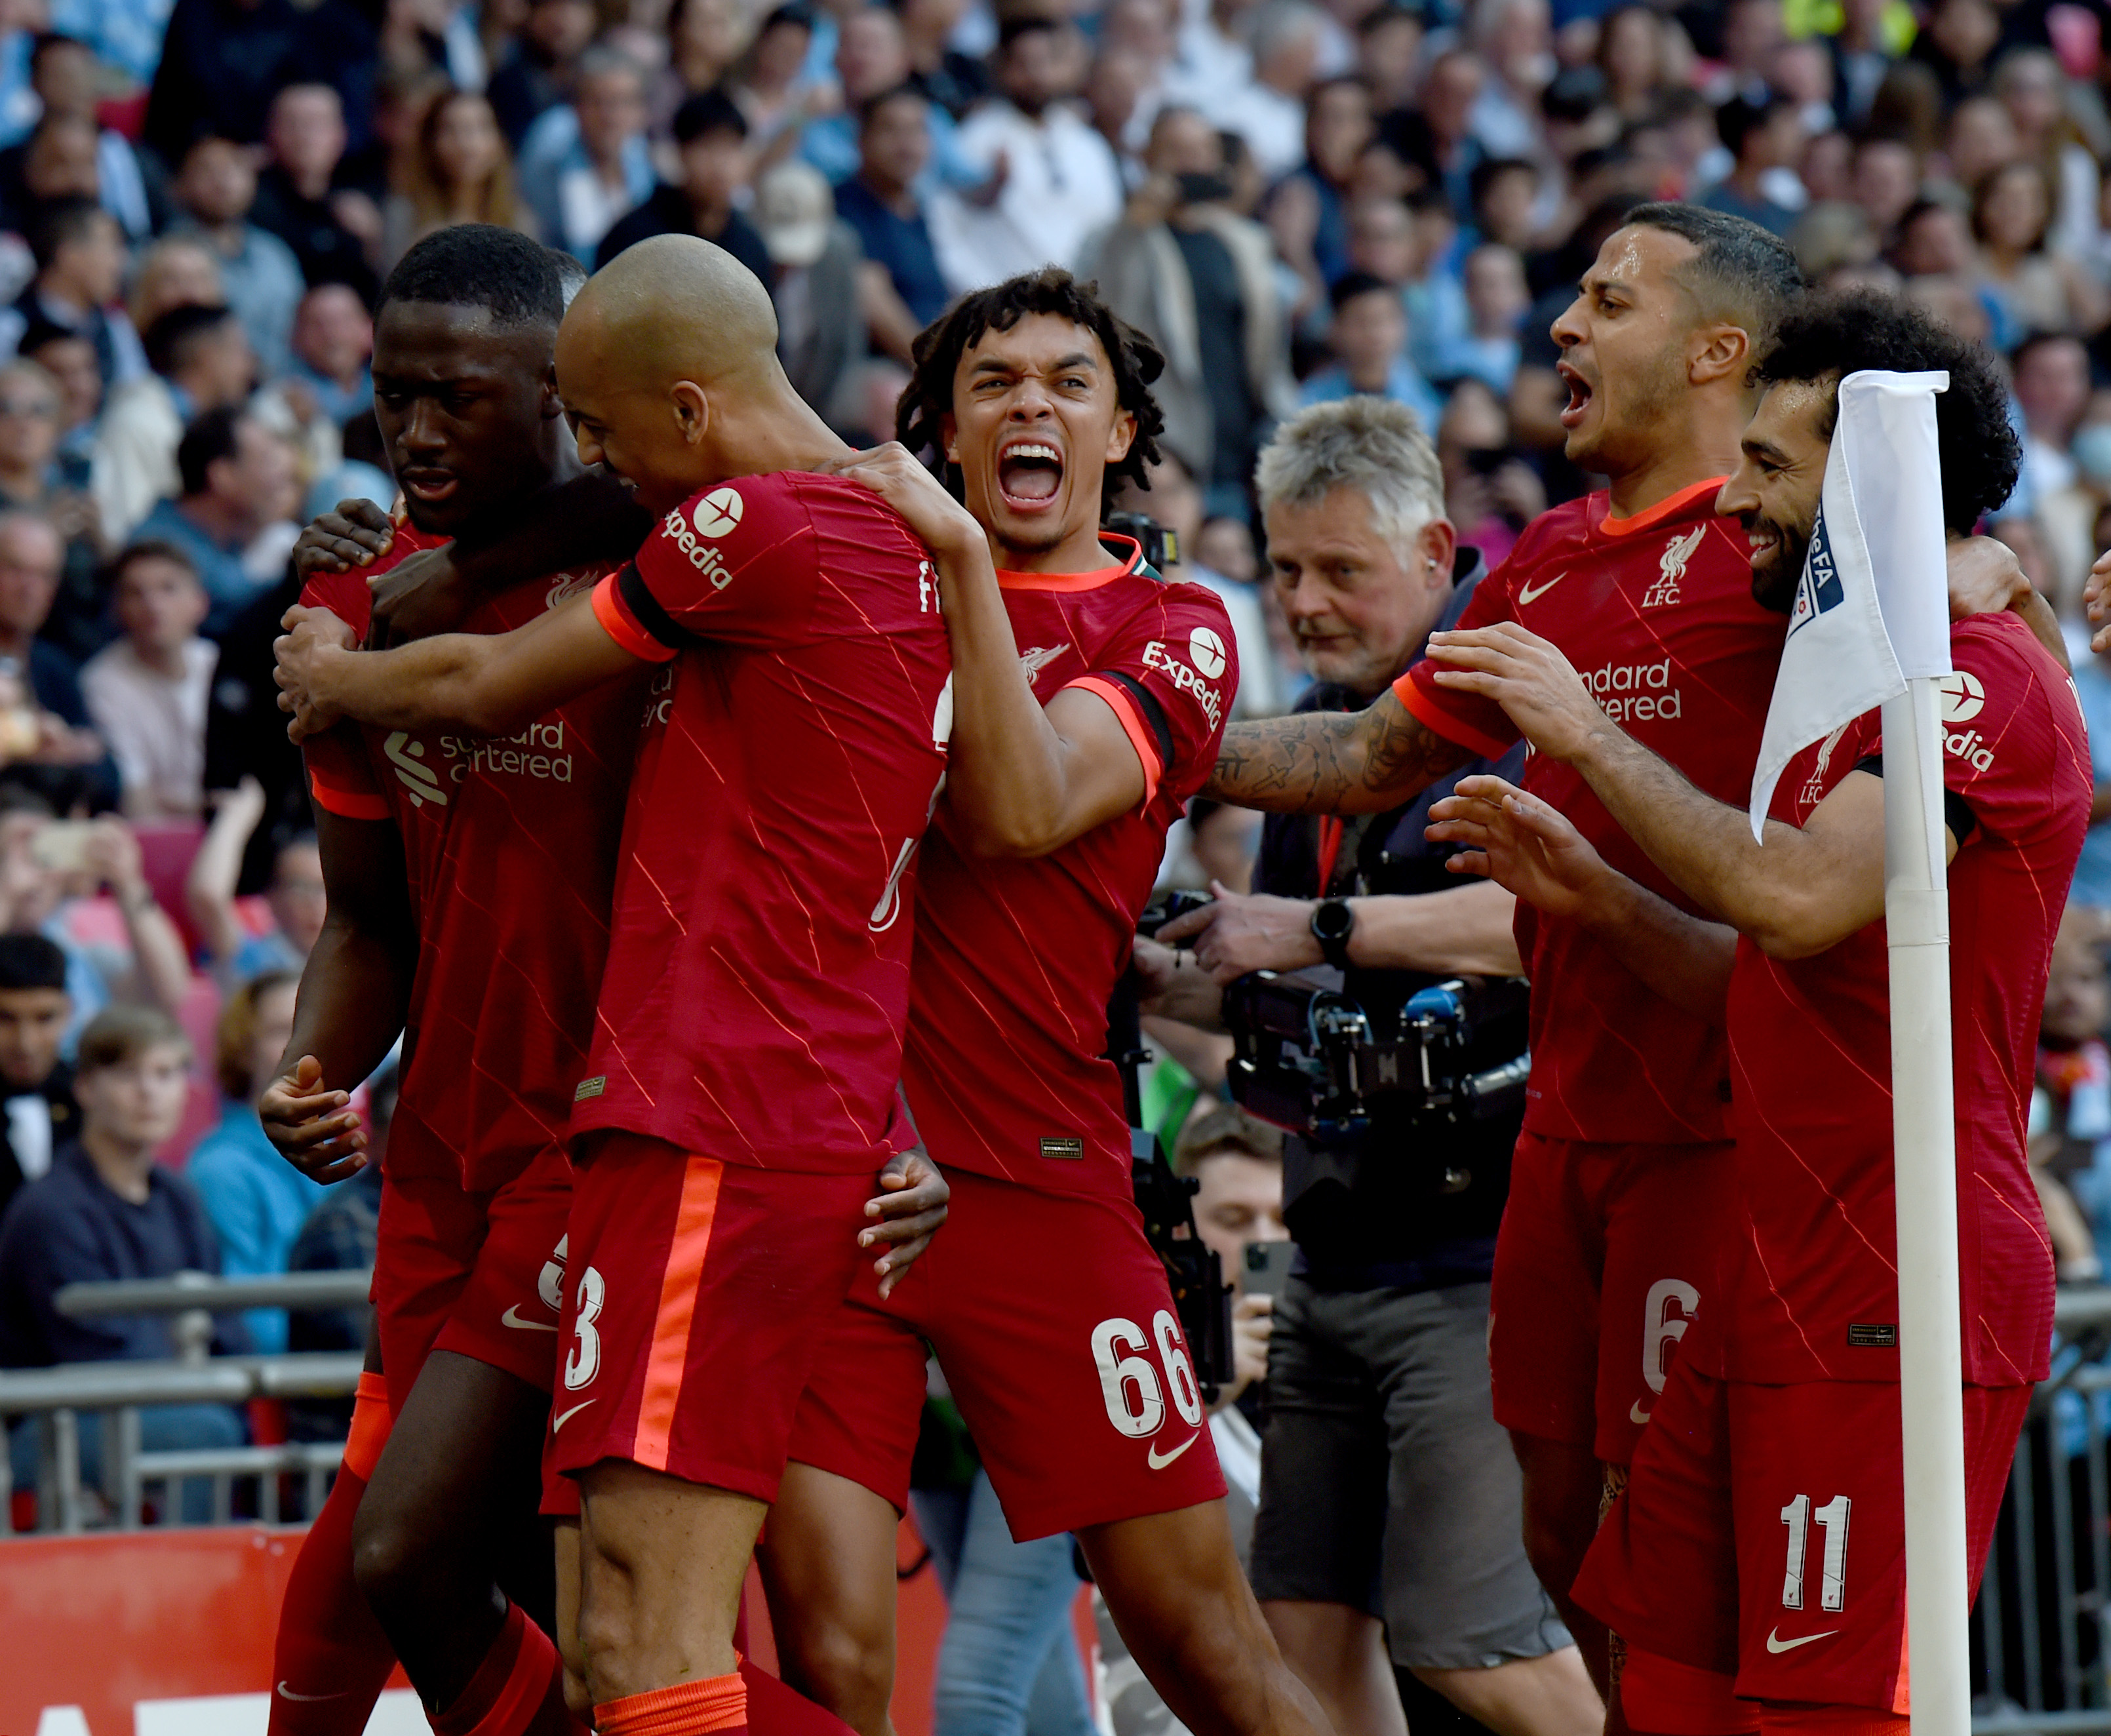 Manchester City vs Liverpool: Liverpool keep QUADRUPLE hopes alive, Man City lose 3-2 to LIVERPOOL: Chelsea/Crystal Palace to face Liverpool in FA Cup FINAL: Check HIGHLIGHTS